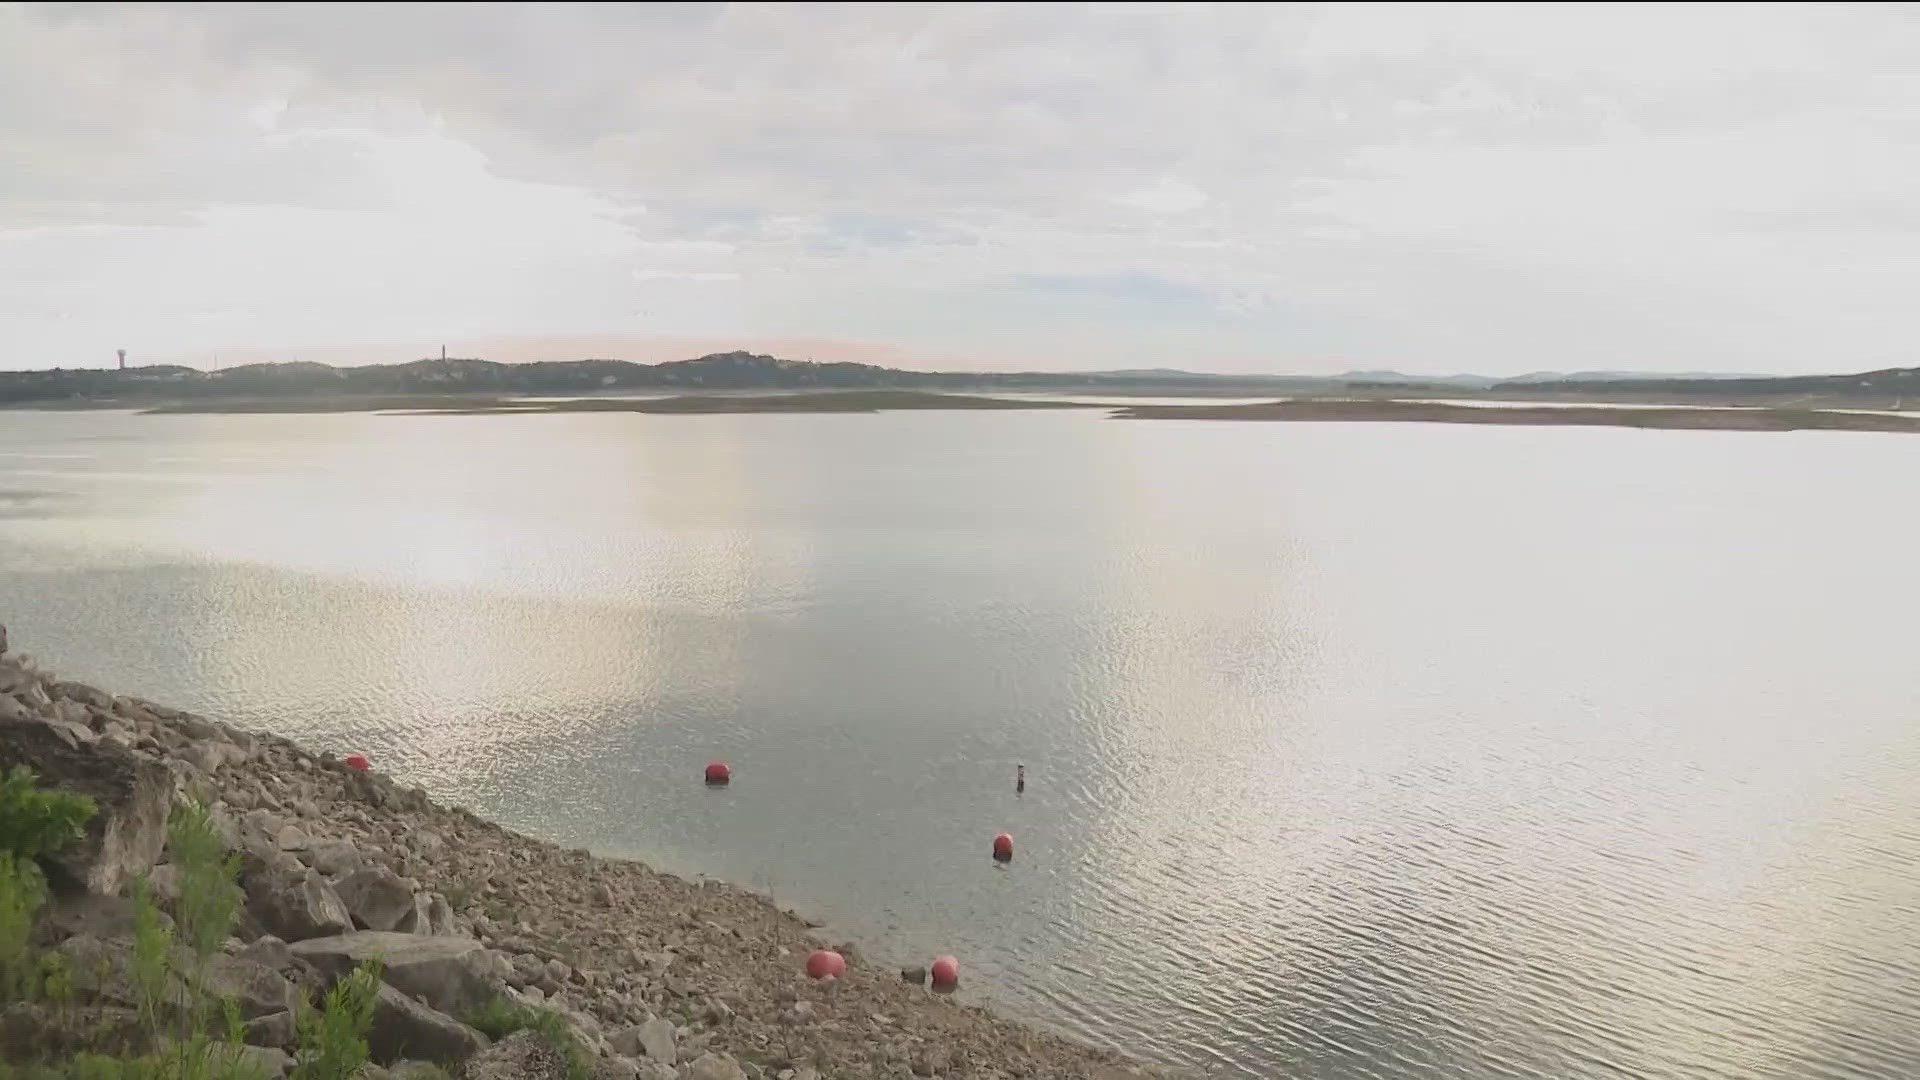 Low lake levels and drought conditions still remain a cause for concern.